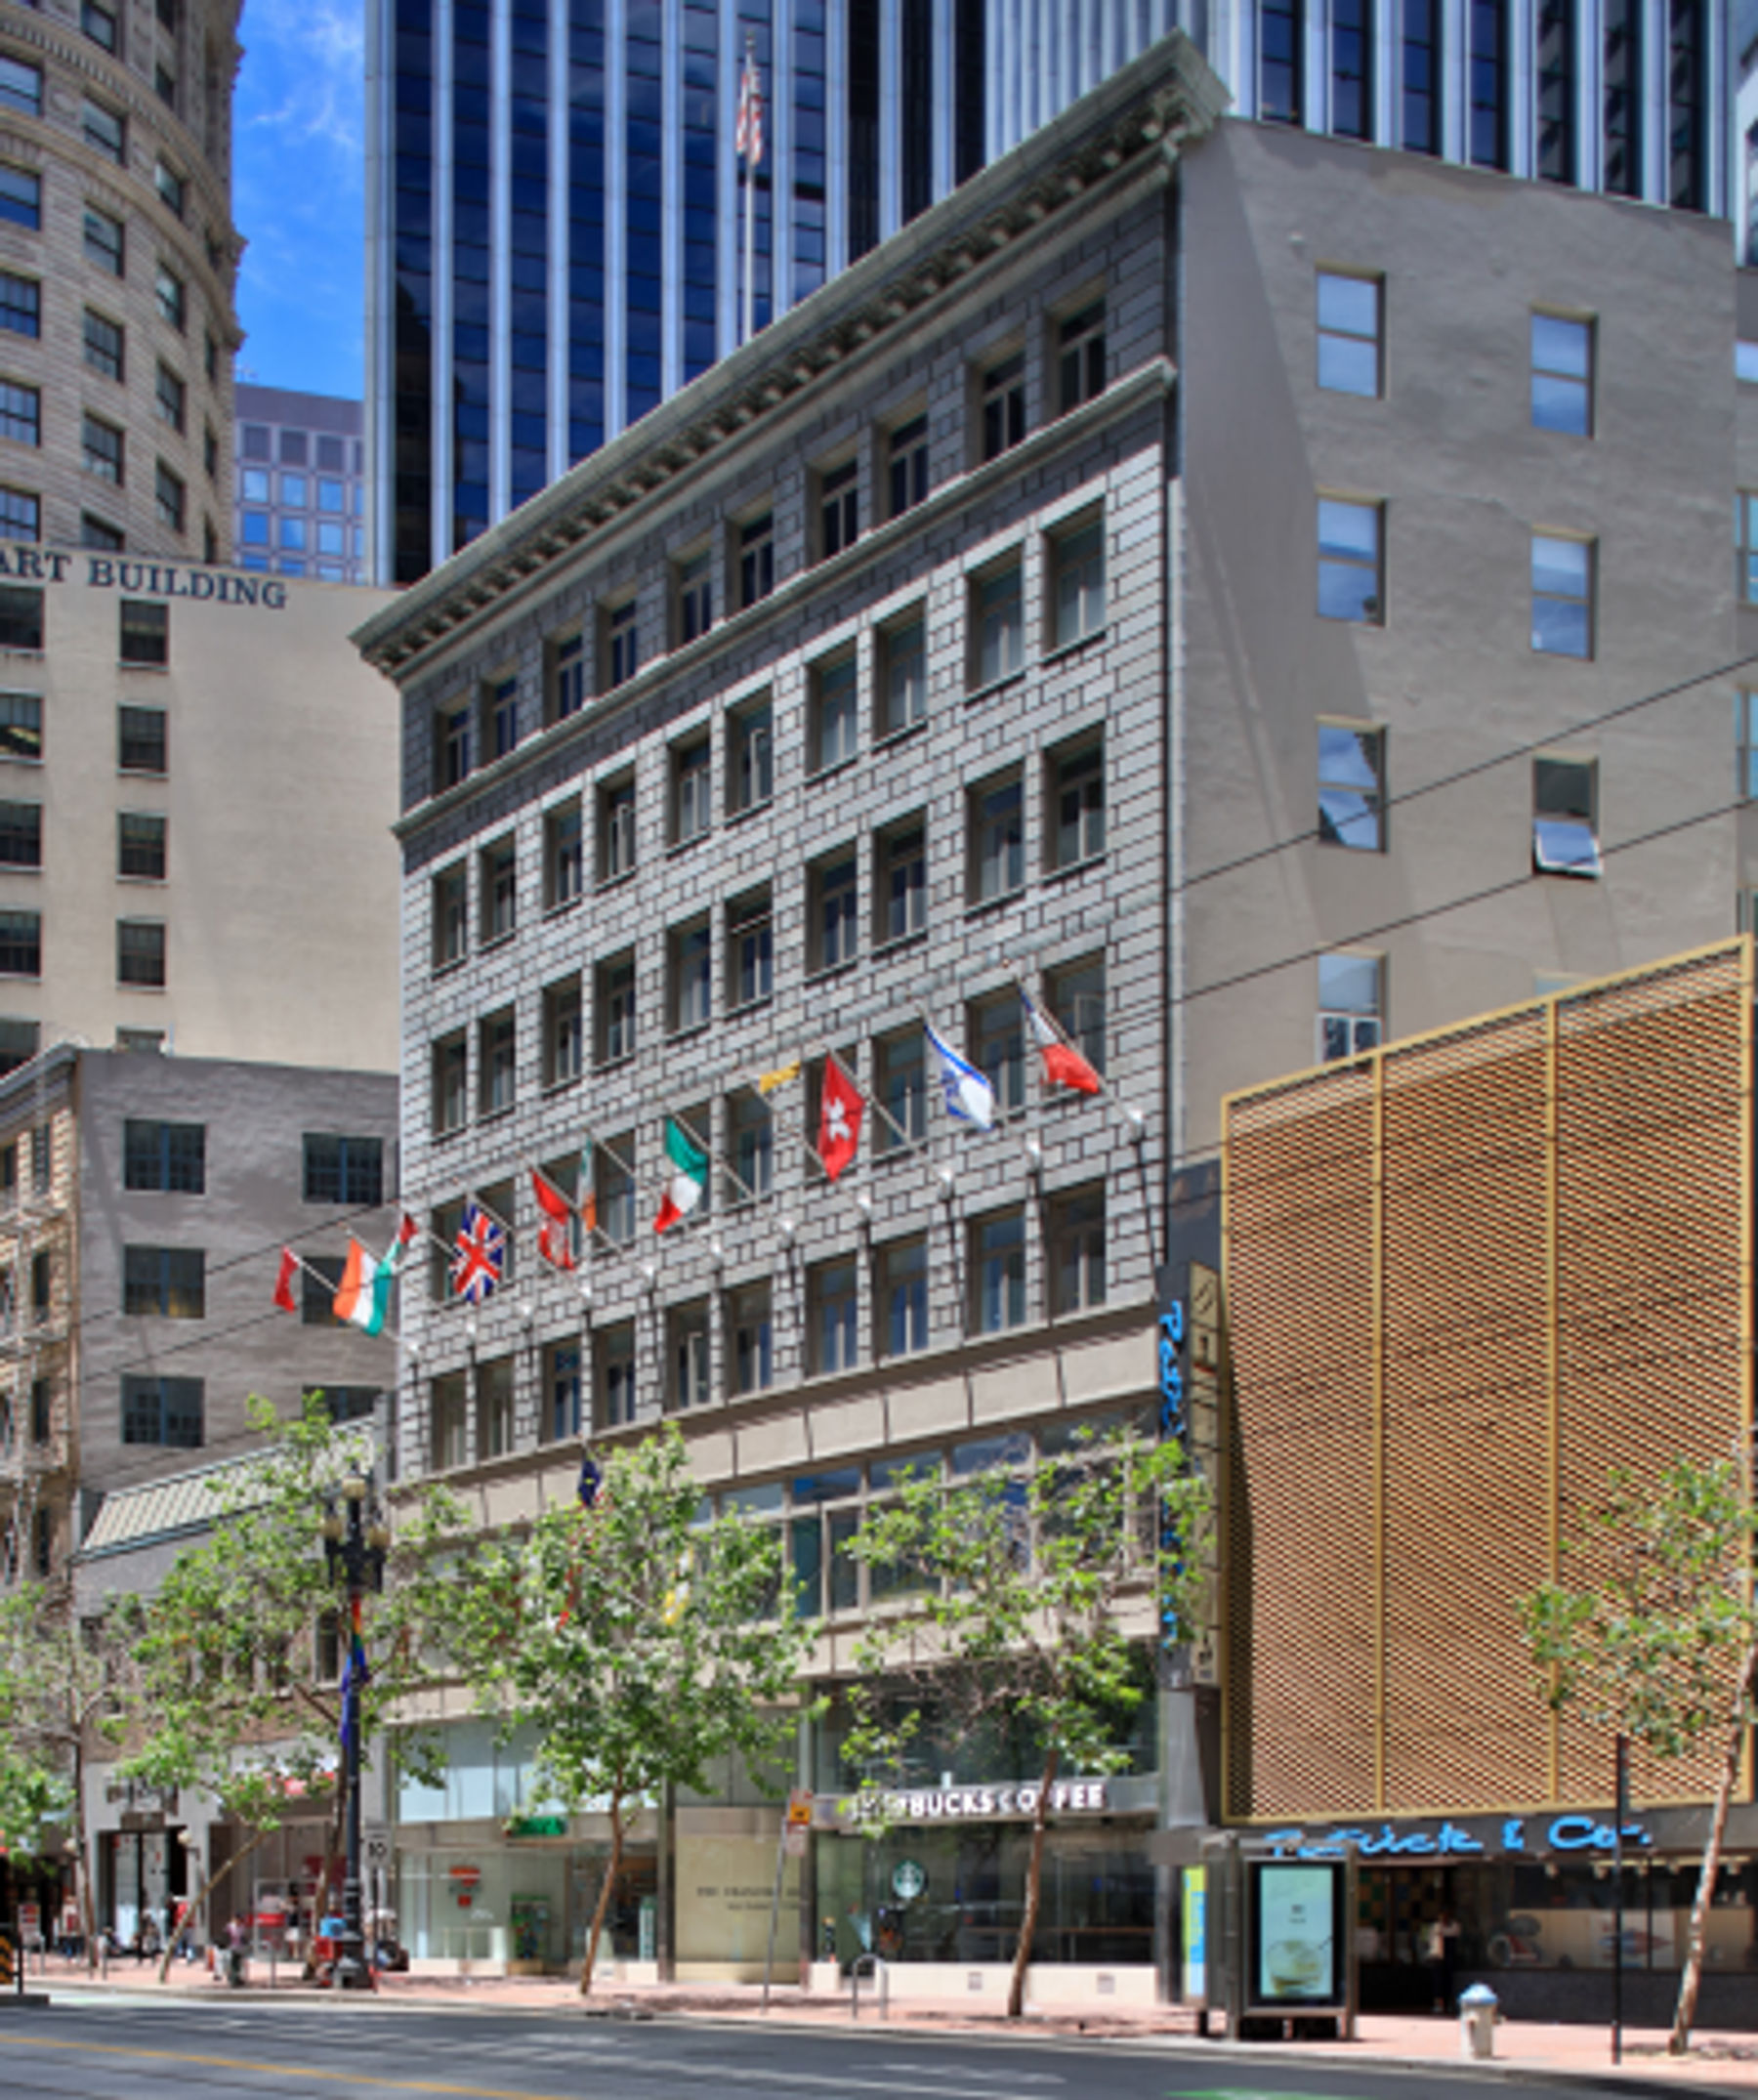 Market St Ground Floor Retail "The Chancery Building" | Downtown San Francisco